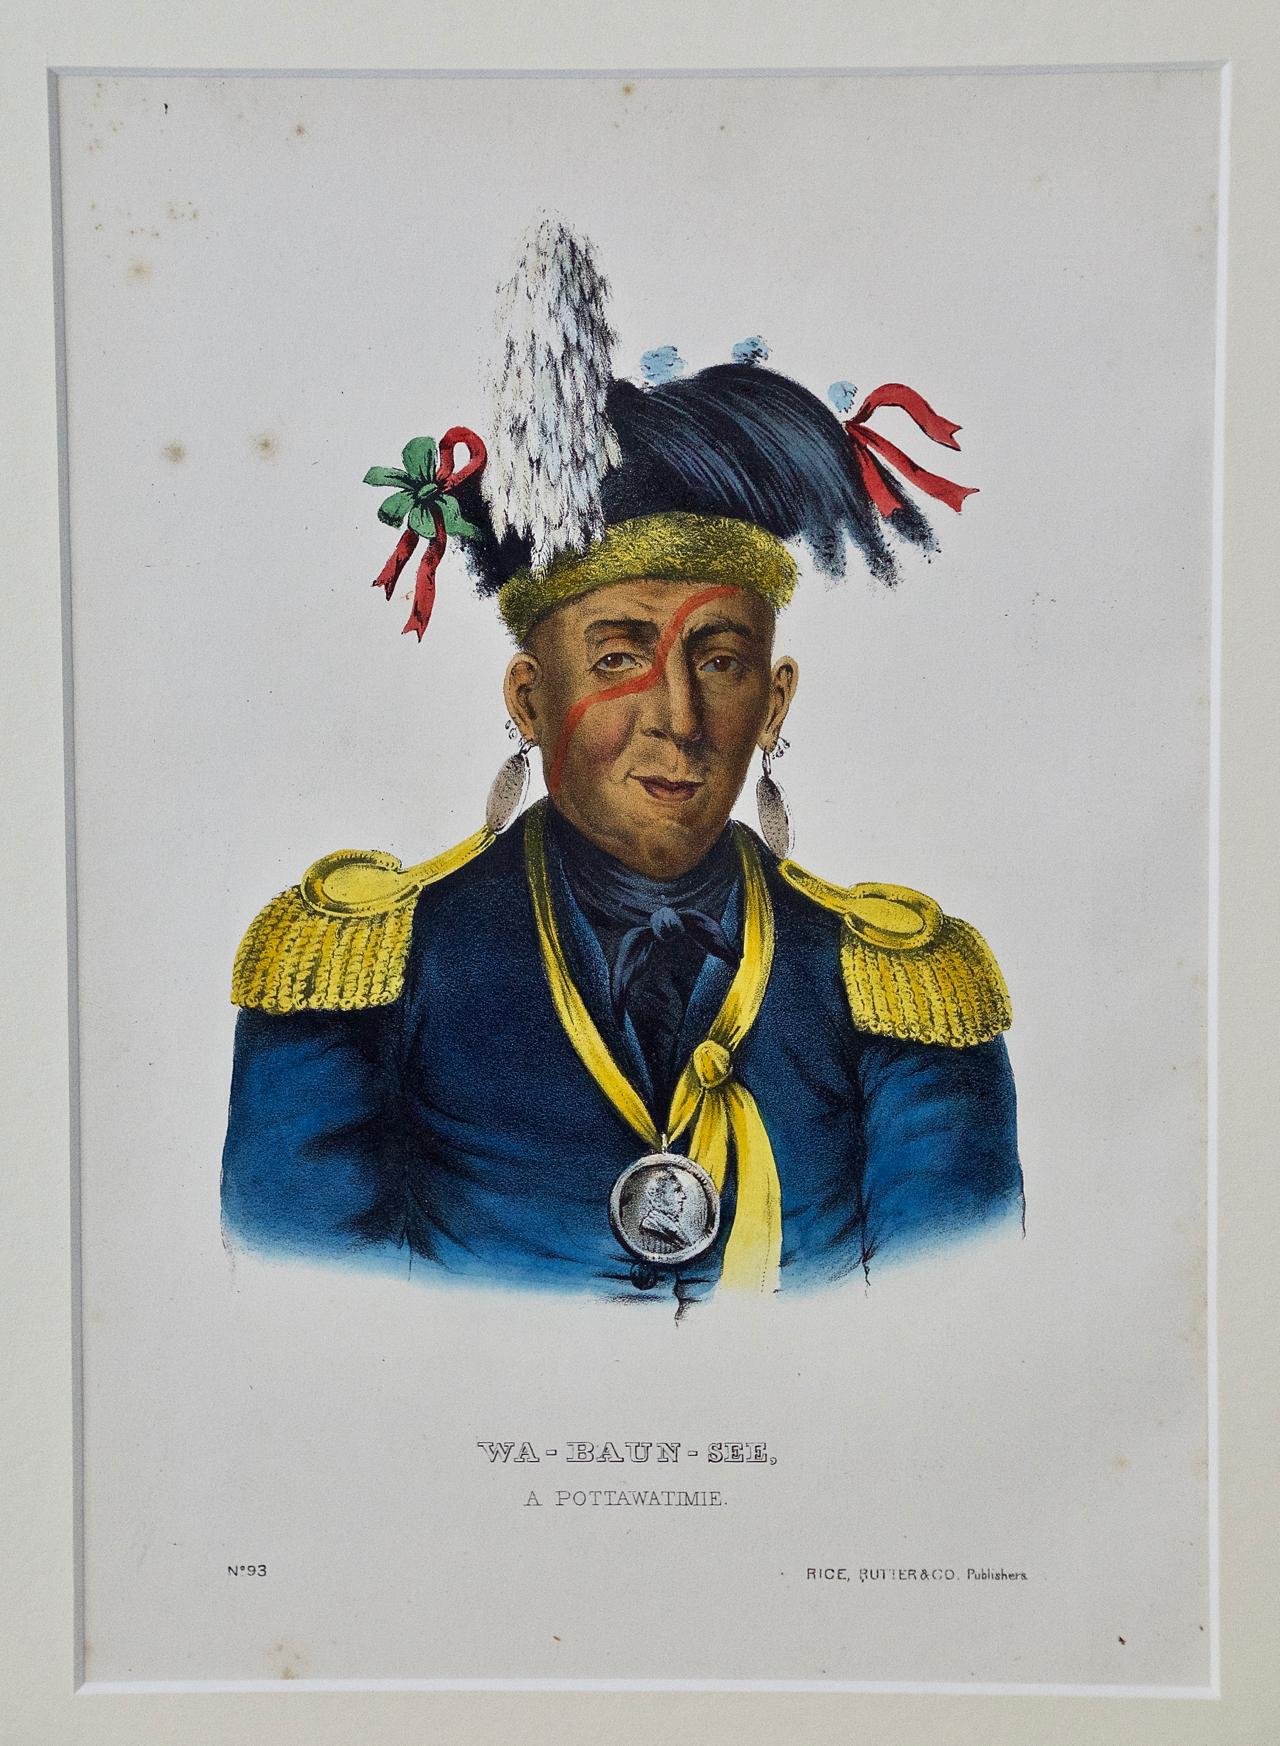 An original 19th century hand colored McKenney and Hall engraving of a Native American entitled "Wa-Baun-See, A Pottawatimie, No. 93", published by Rice, Rutter & Co. in 1865.

This original McKenney and Hall engraving is presented in a cream